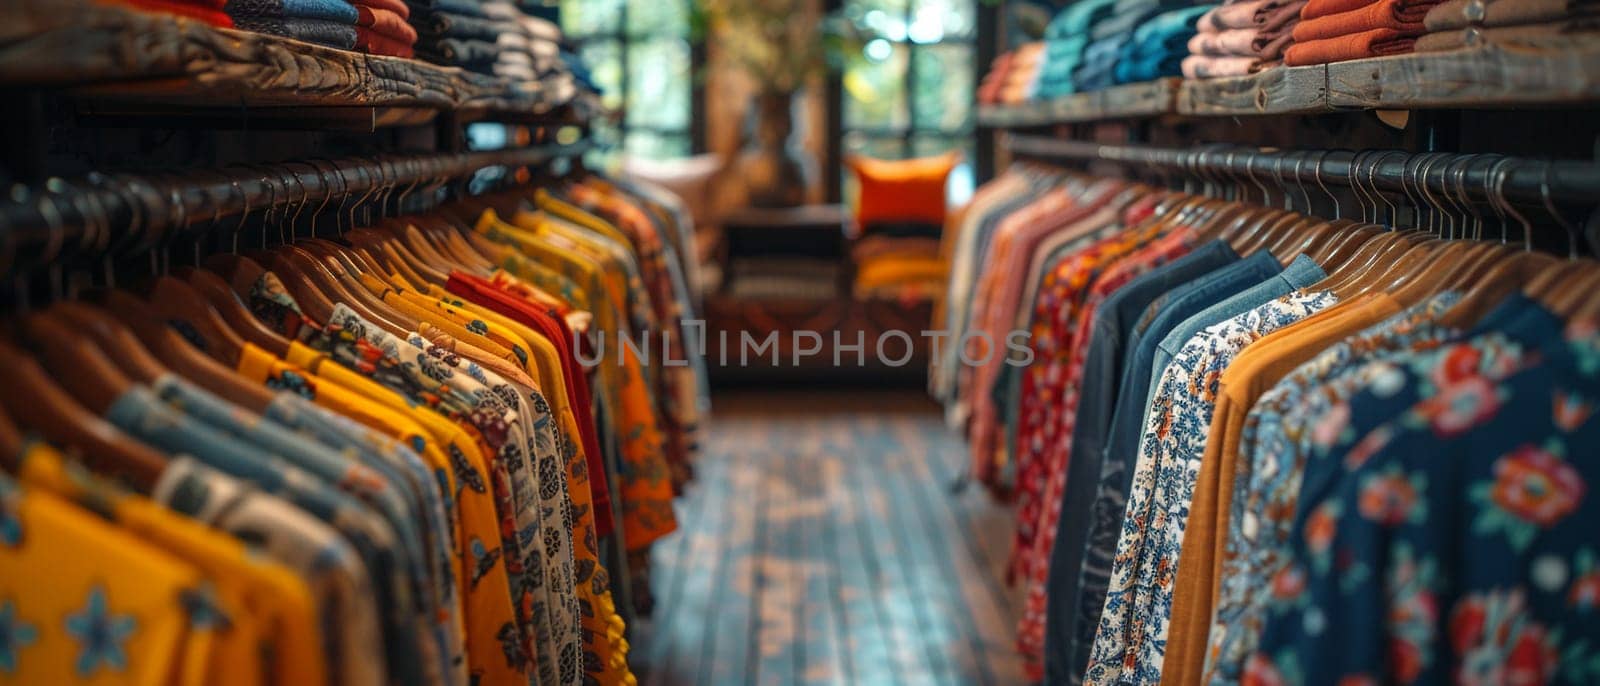 Eco-Friendly Fashion Boutique Drapes Consciousness in Business of Style, Racks and hangers drape a narrative of sustainability in the fashionable business world.